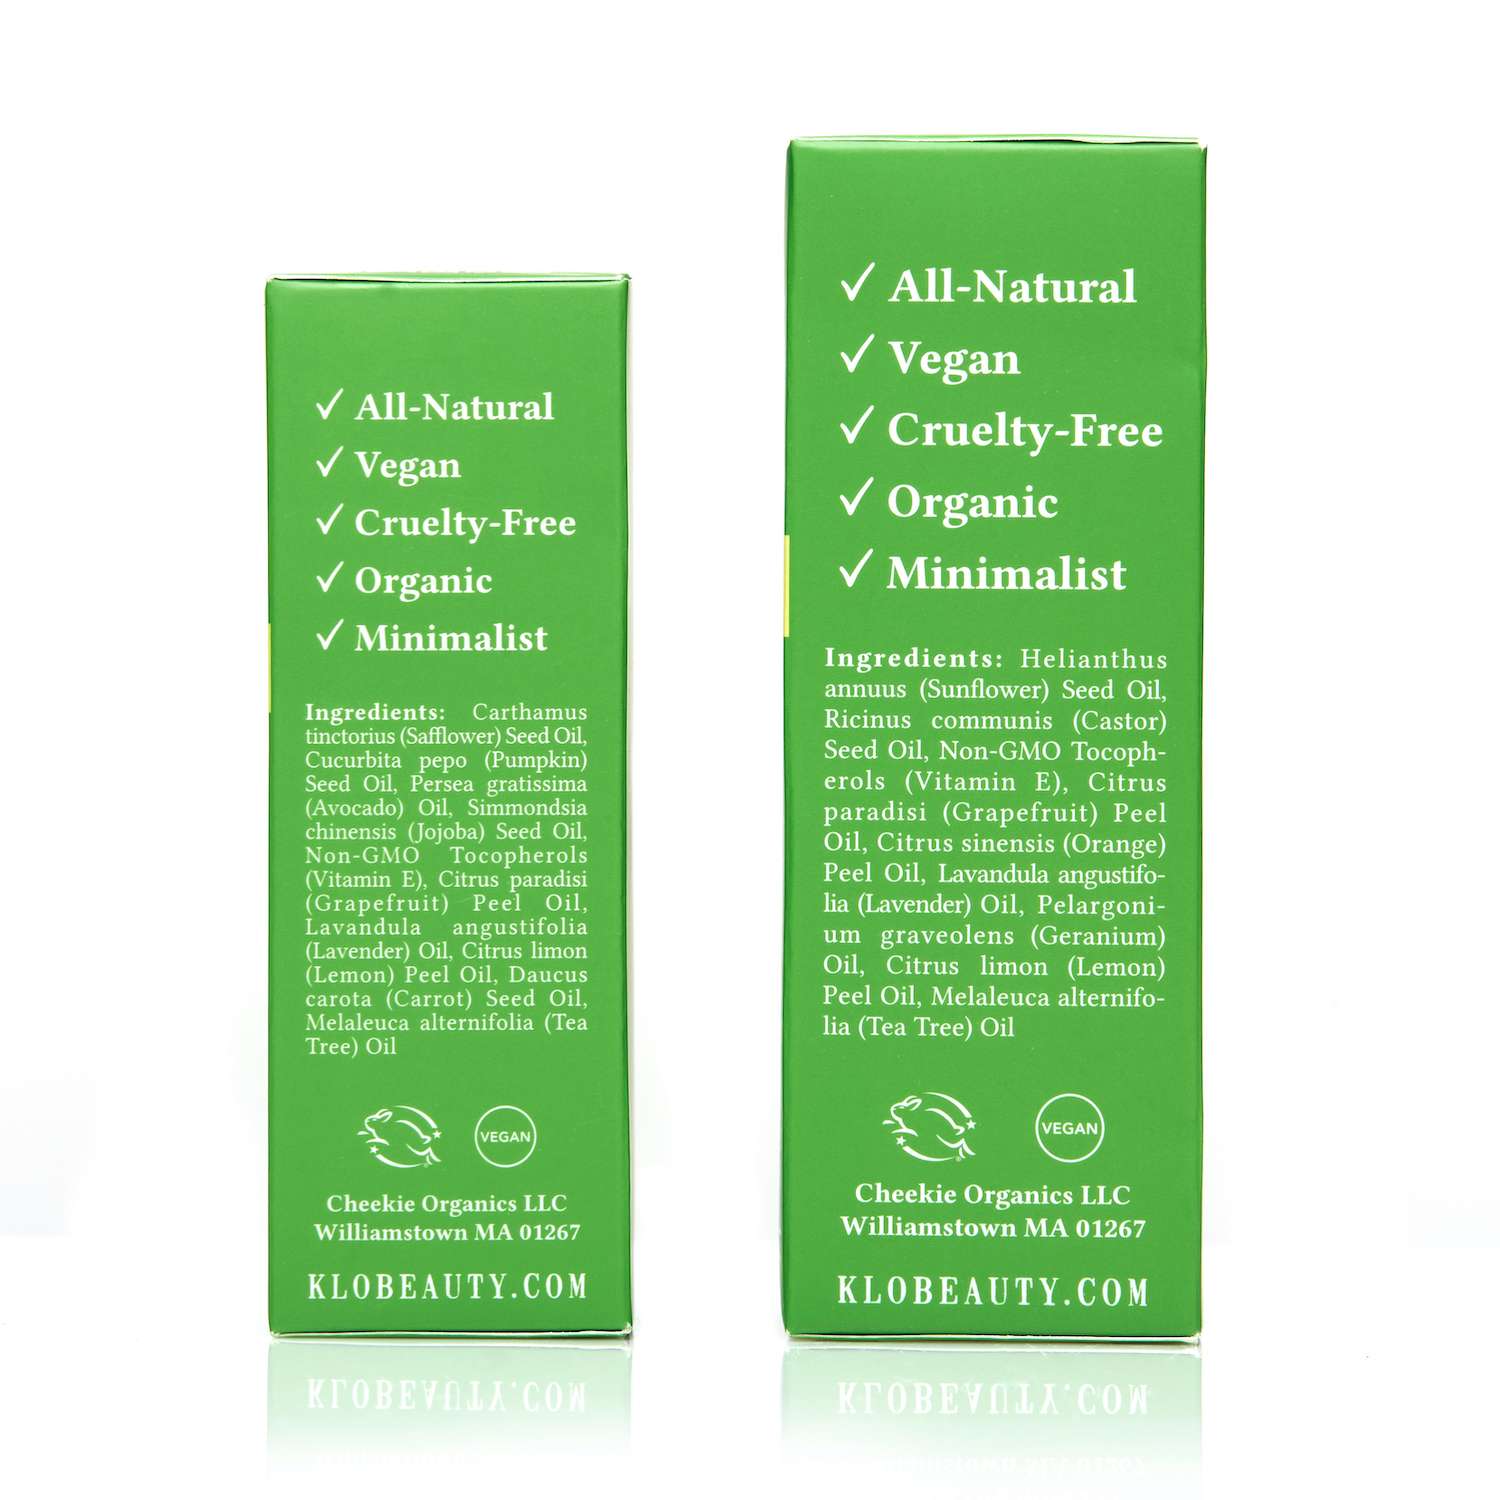 Klo Organic Beauty RE3 oil cleanser and serum duo for acne-prone skin sides of boxes with ingredients.